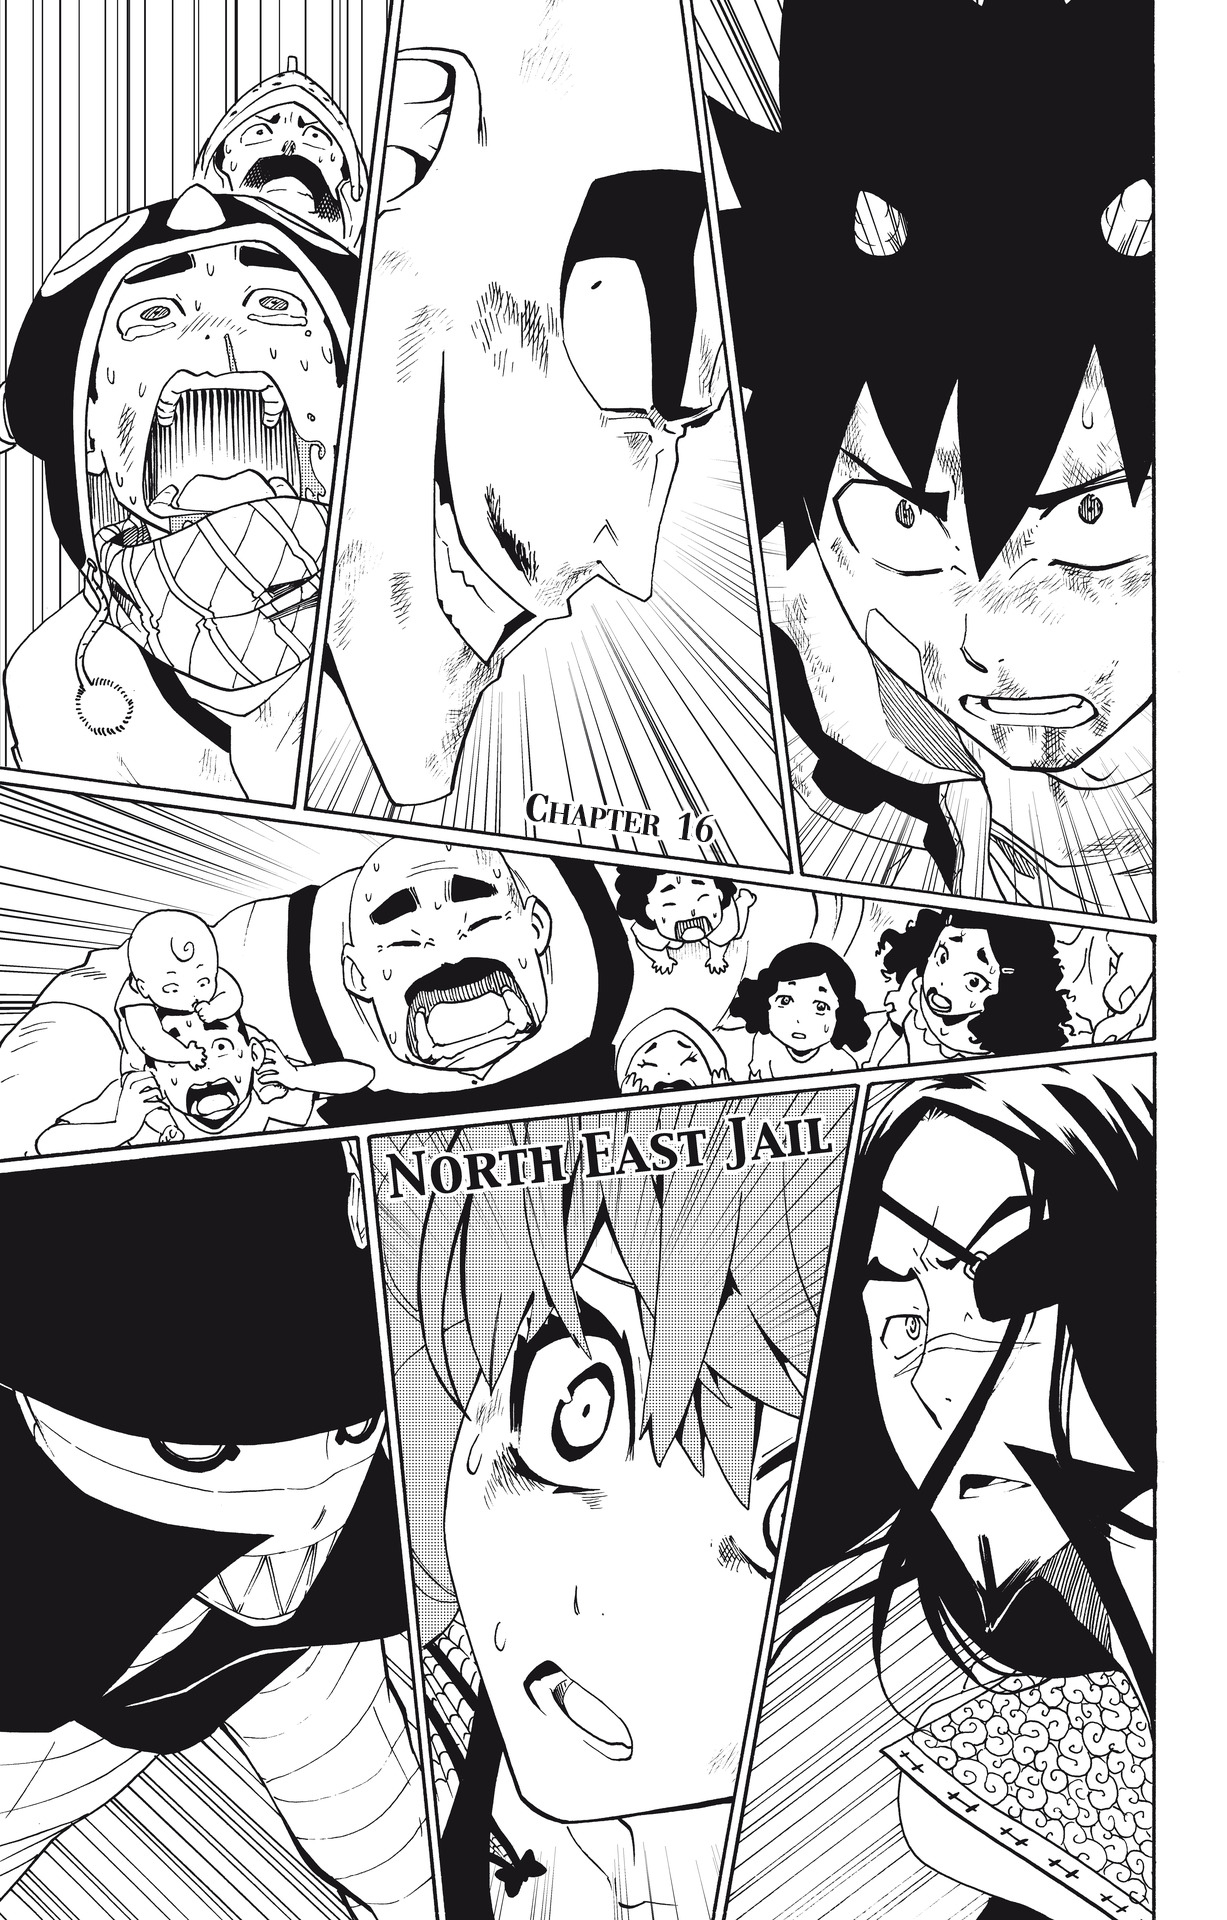 Radiant Vol. 3 Ch. 16 North East Jail